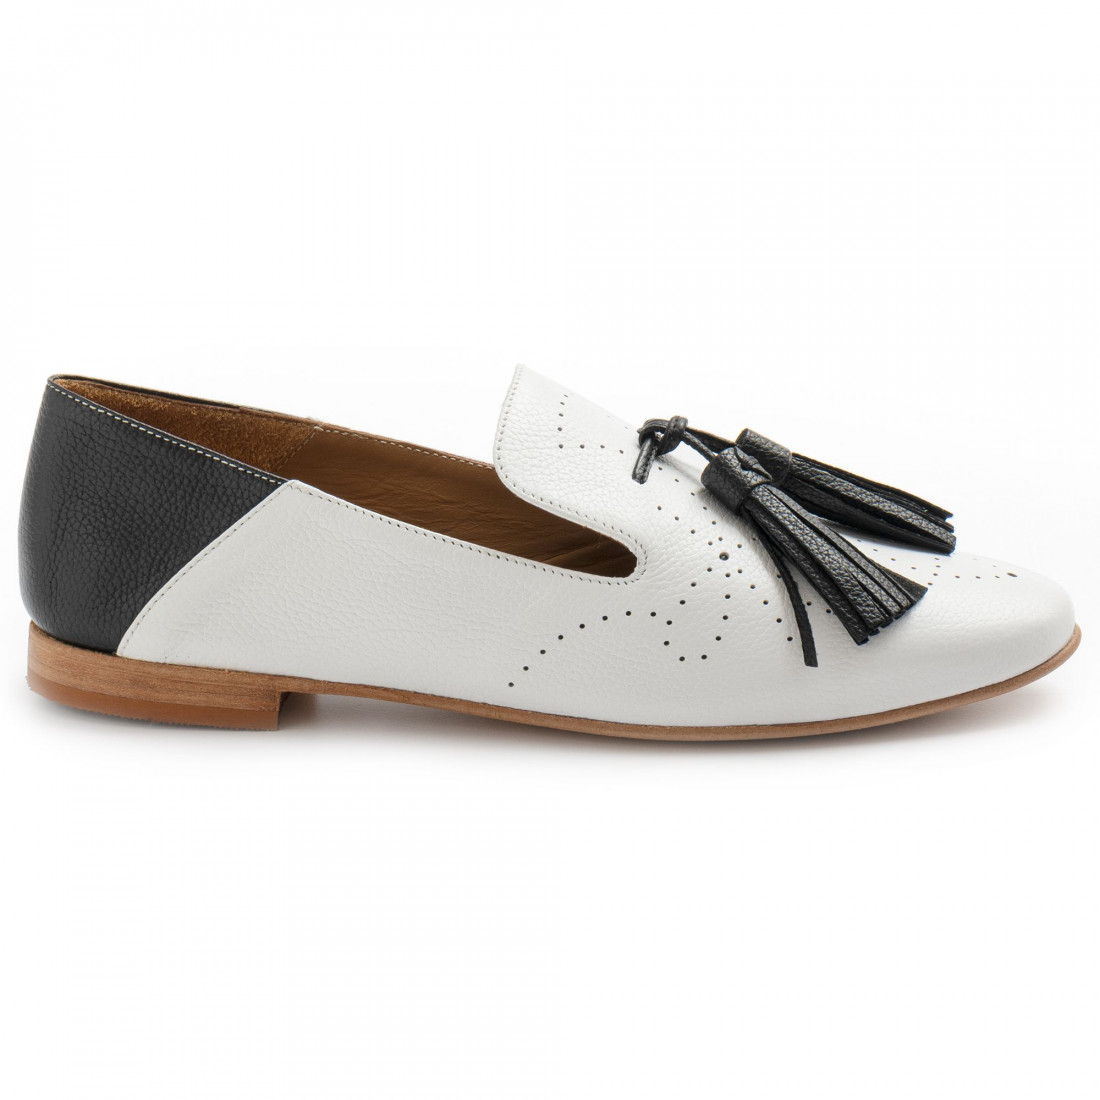 Milano women's flat shoe white and black with tassels